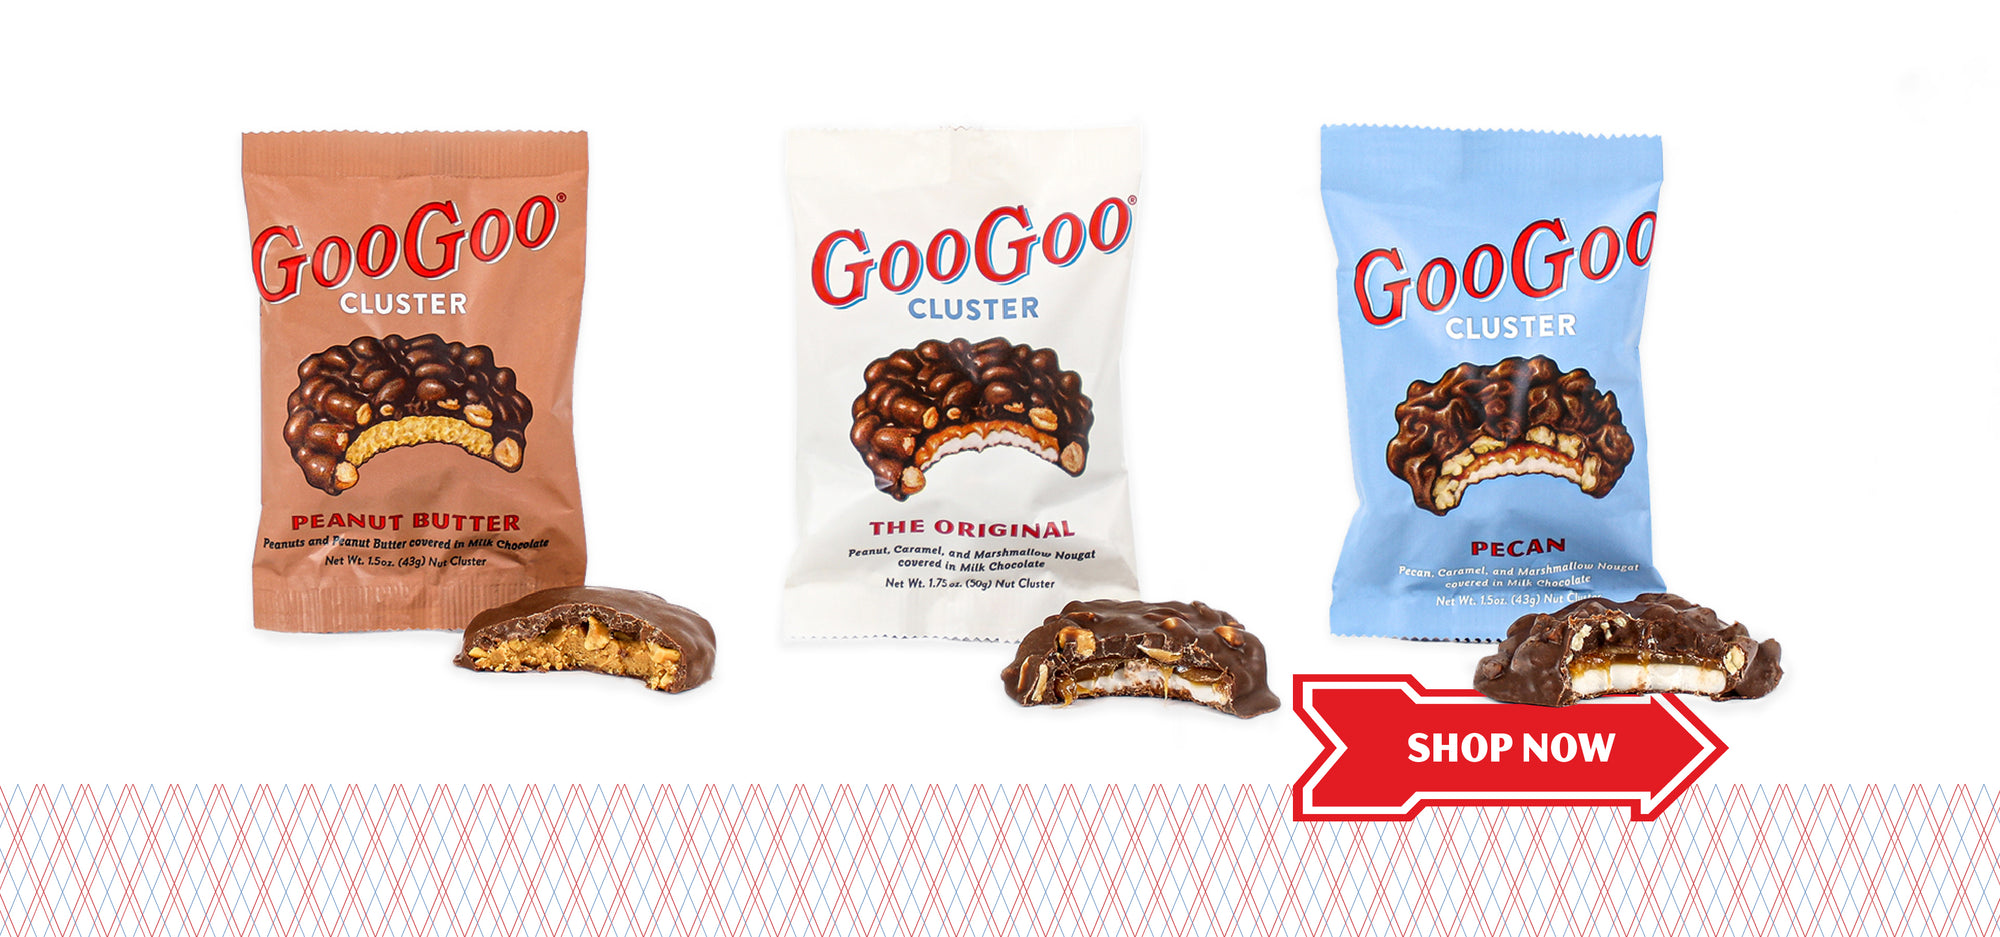 Buy Goo Goo Cluster Supreme Chocolate, 1.5 Ounce Online at